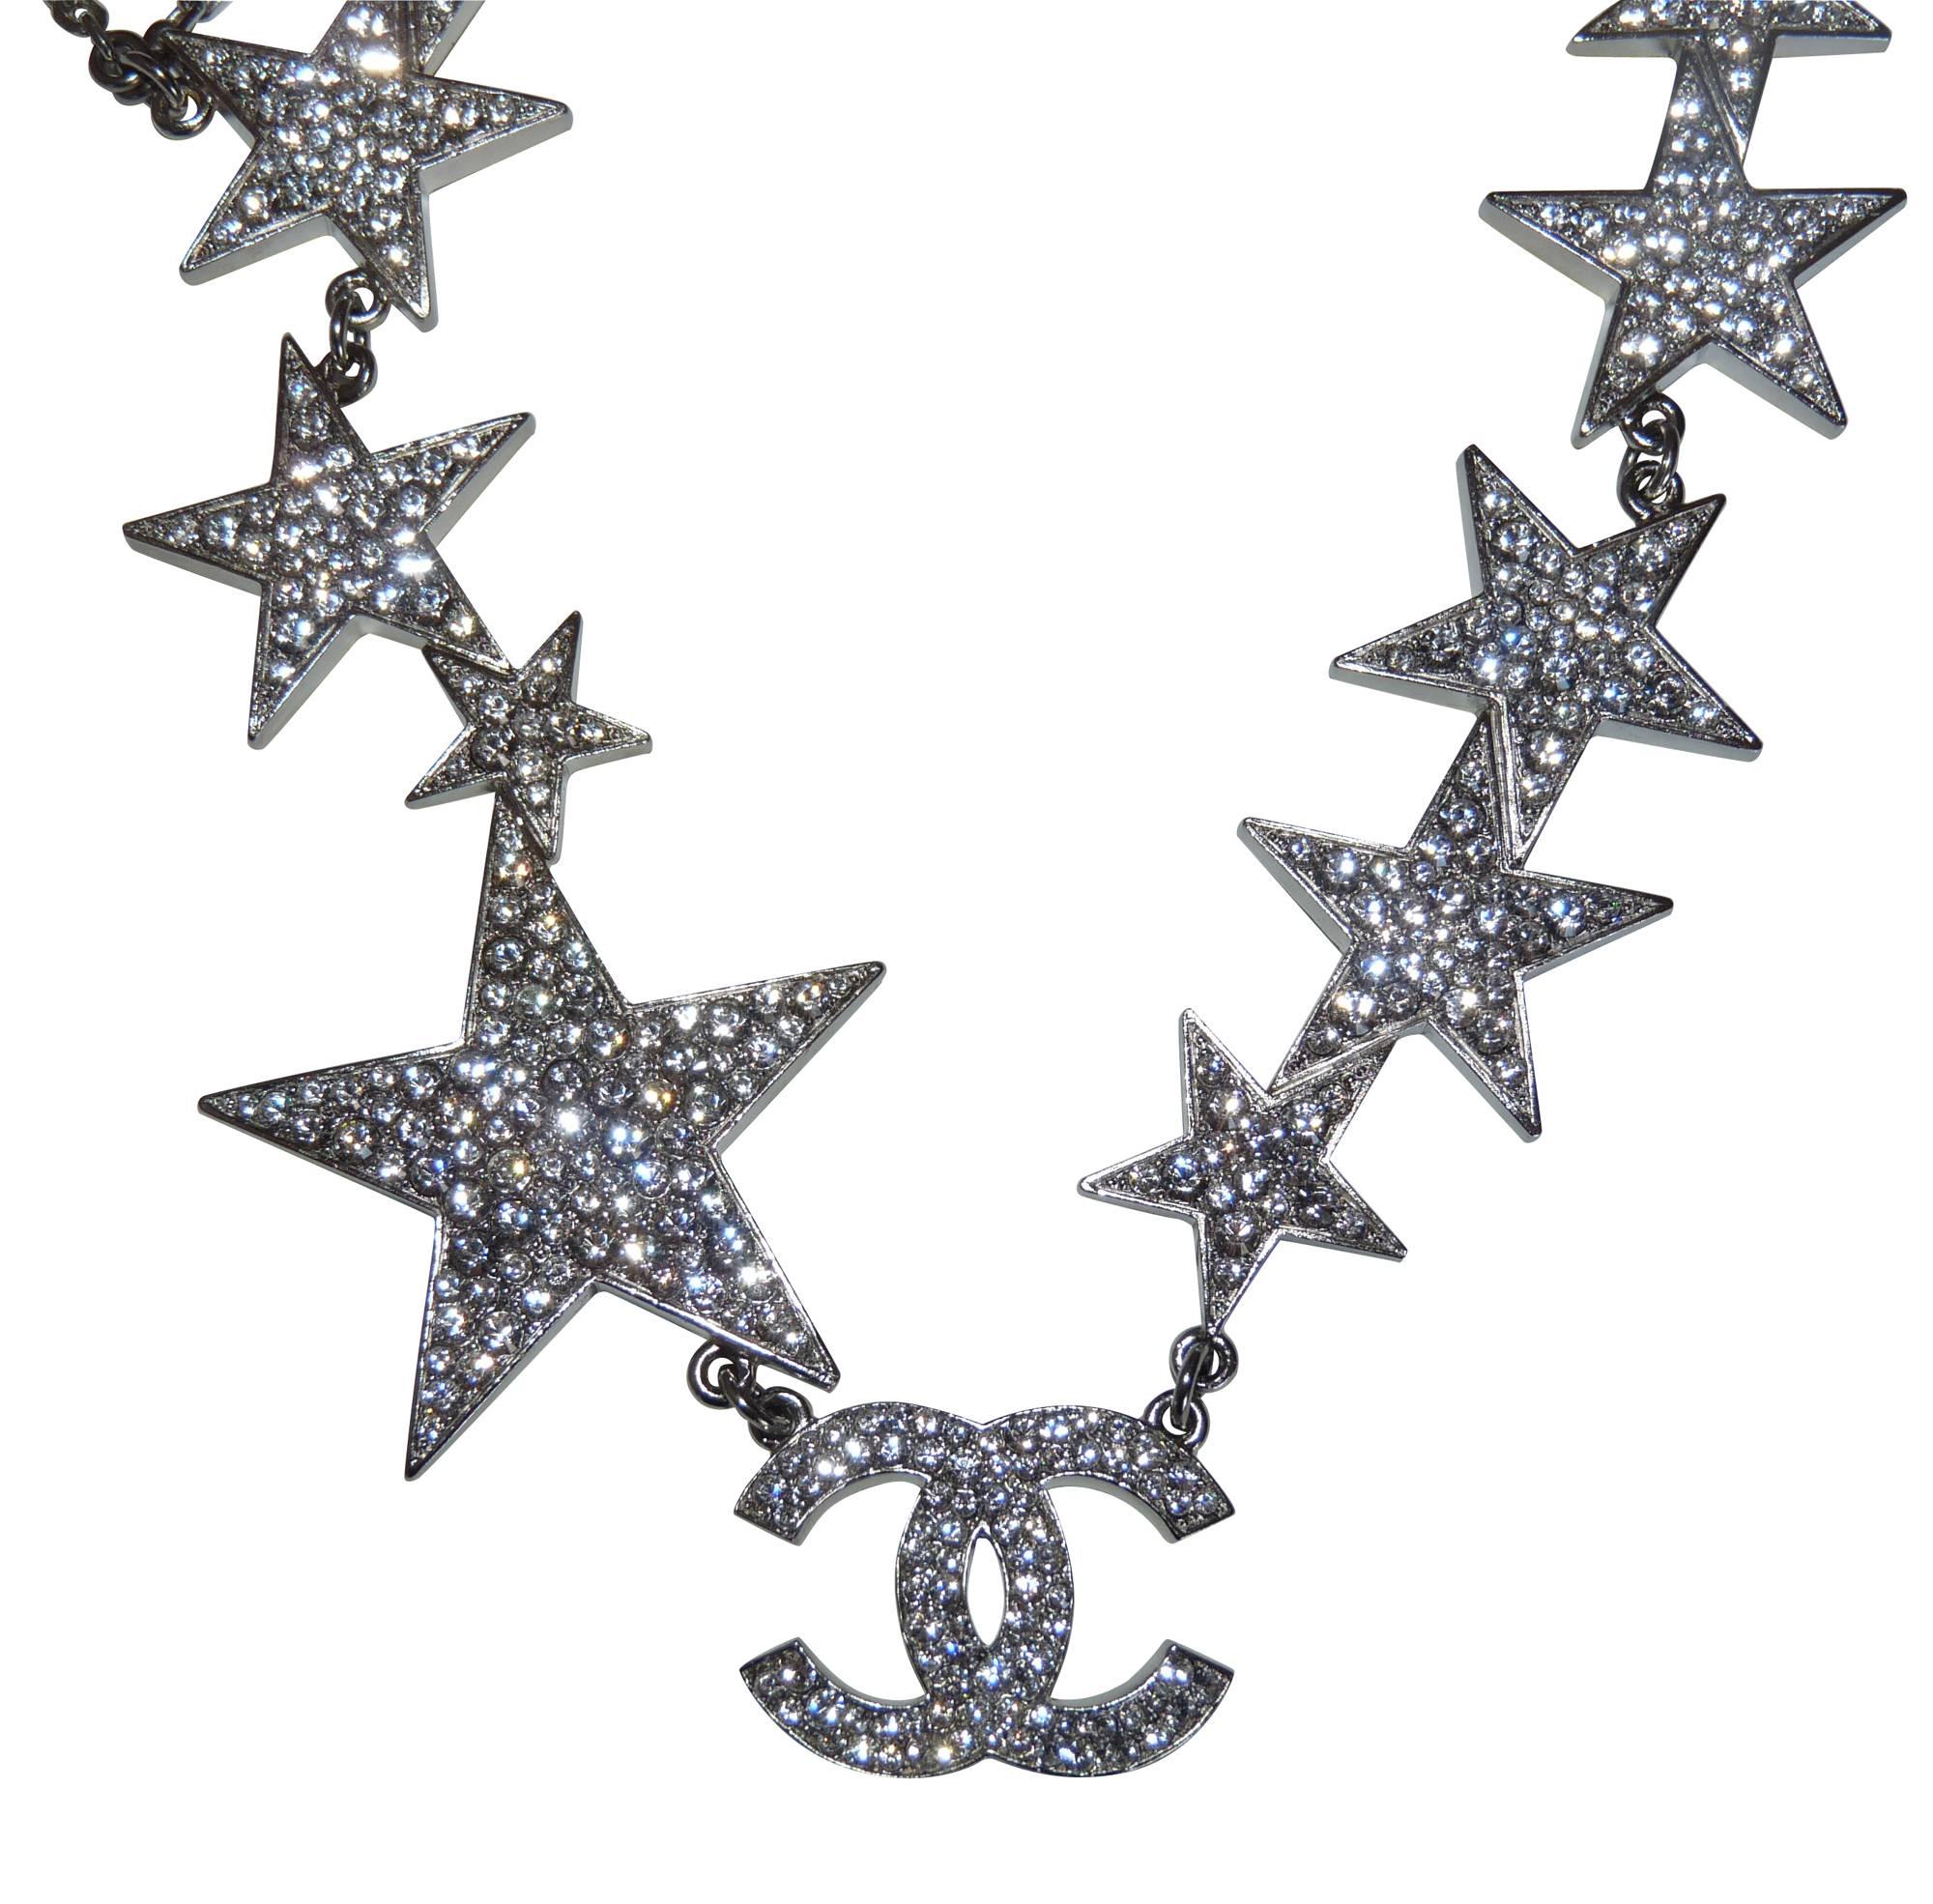 Beautiful Chanel belt in fine silver multi strand metal chains.
Adorned with stars of different sizes and the initials Chanel, it is reversible, stars in rhinestones and the other in silver glitter paste.
Star Diameter 4 - 2.5 - 2 - and 1.5